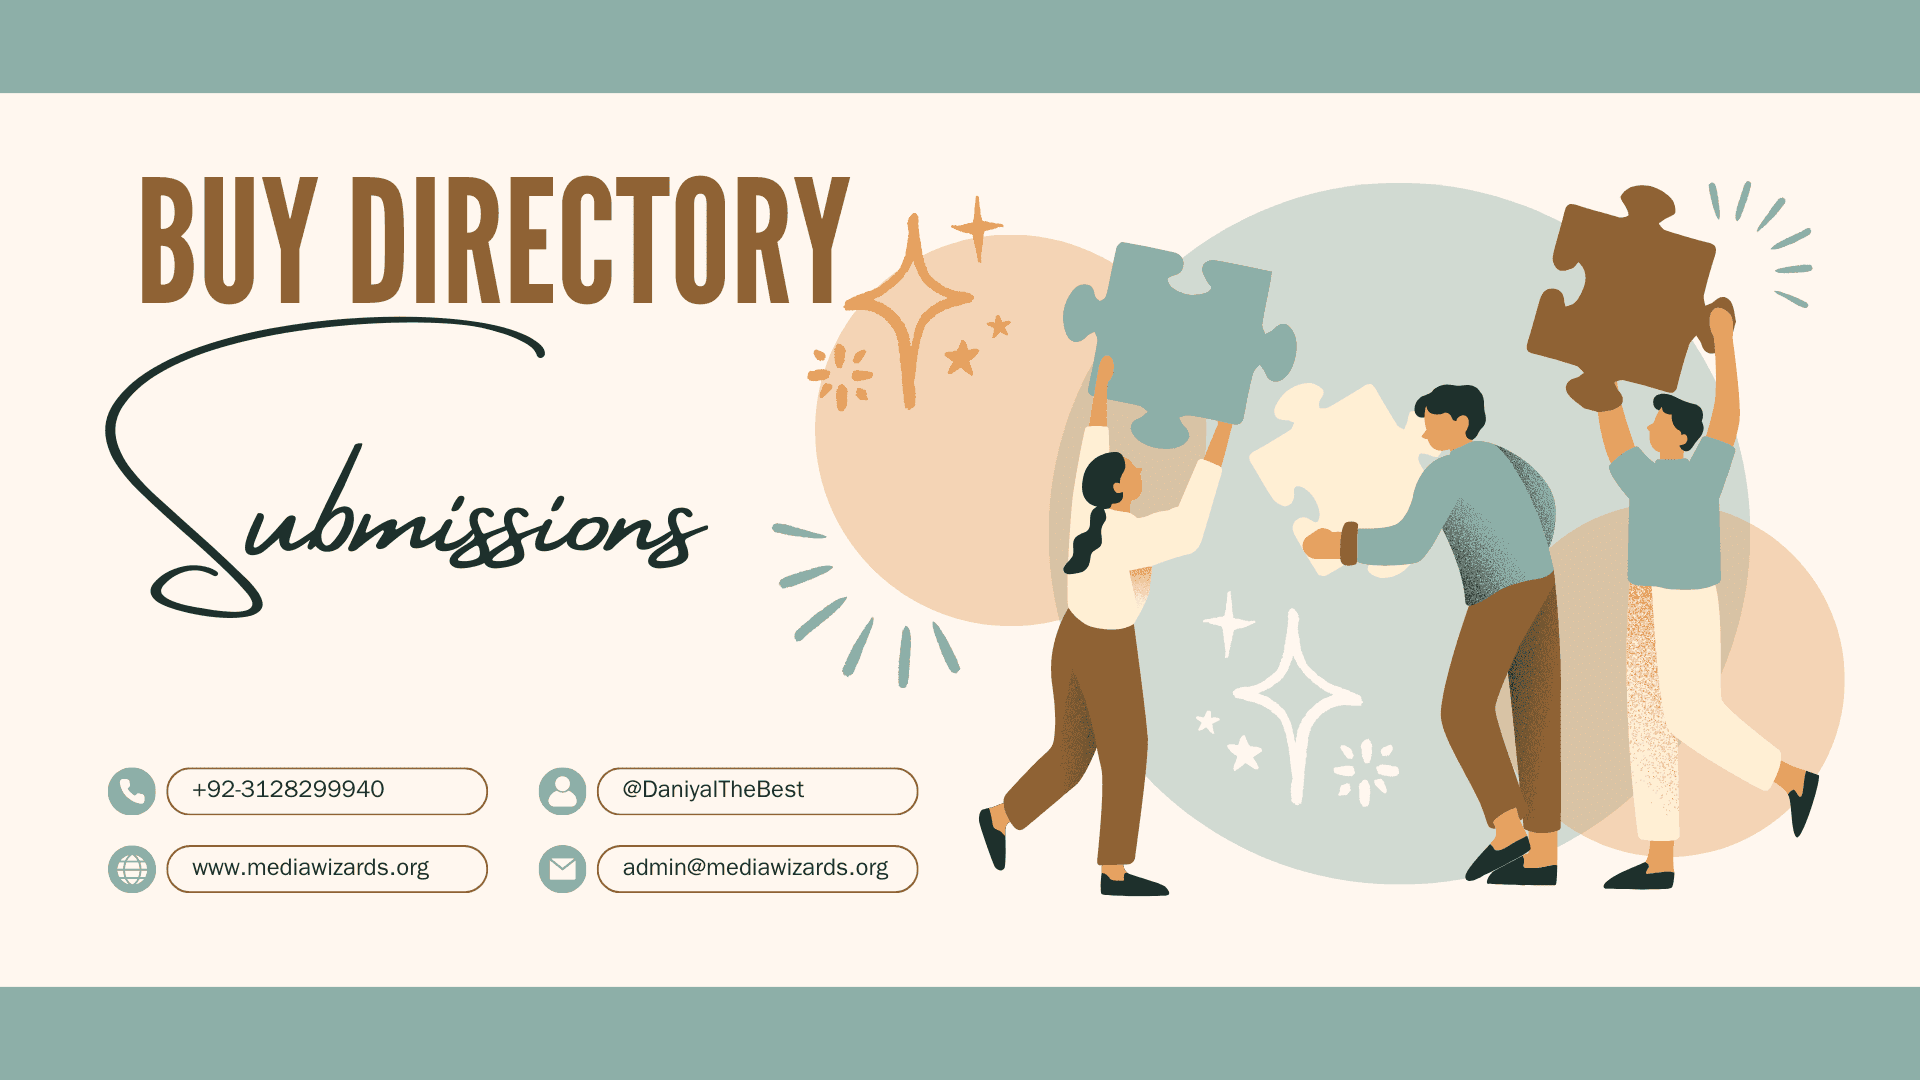 What is Directory Submissions?